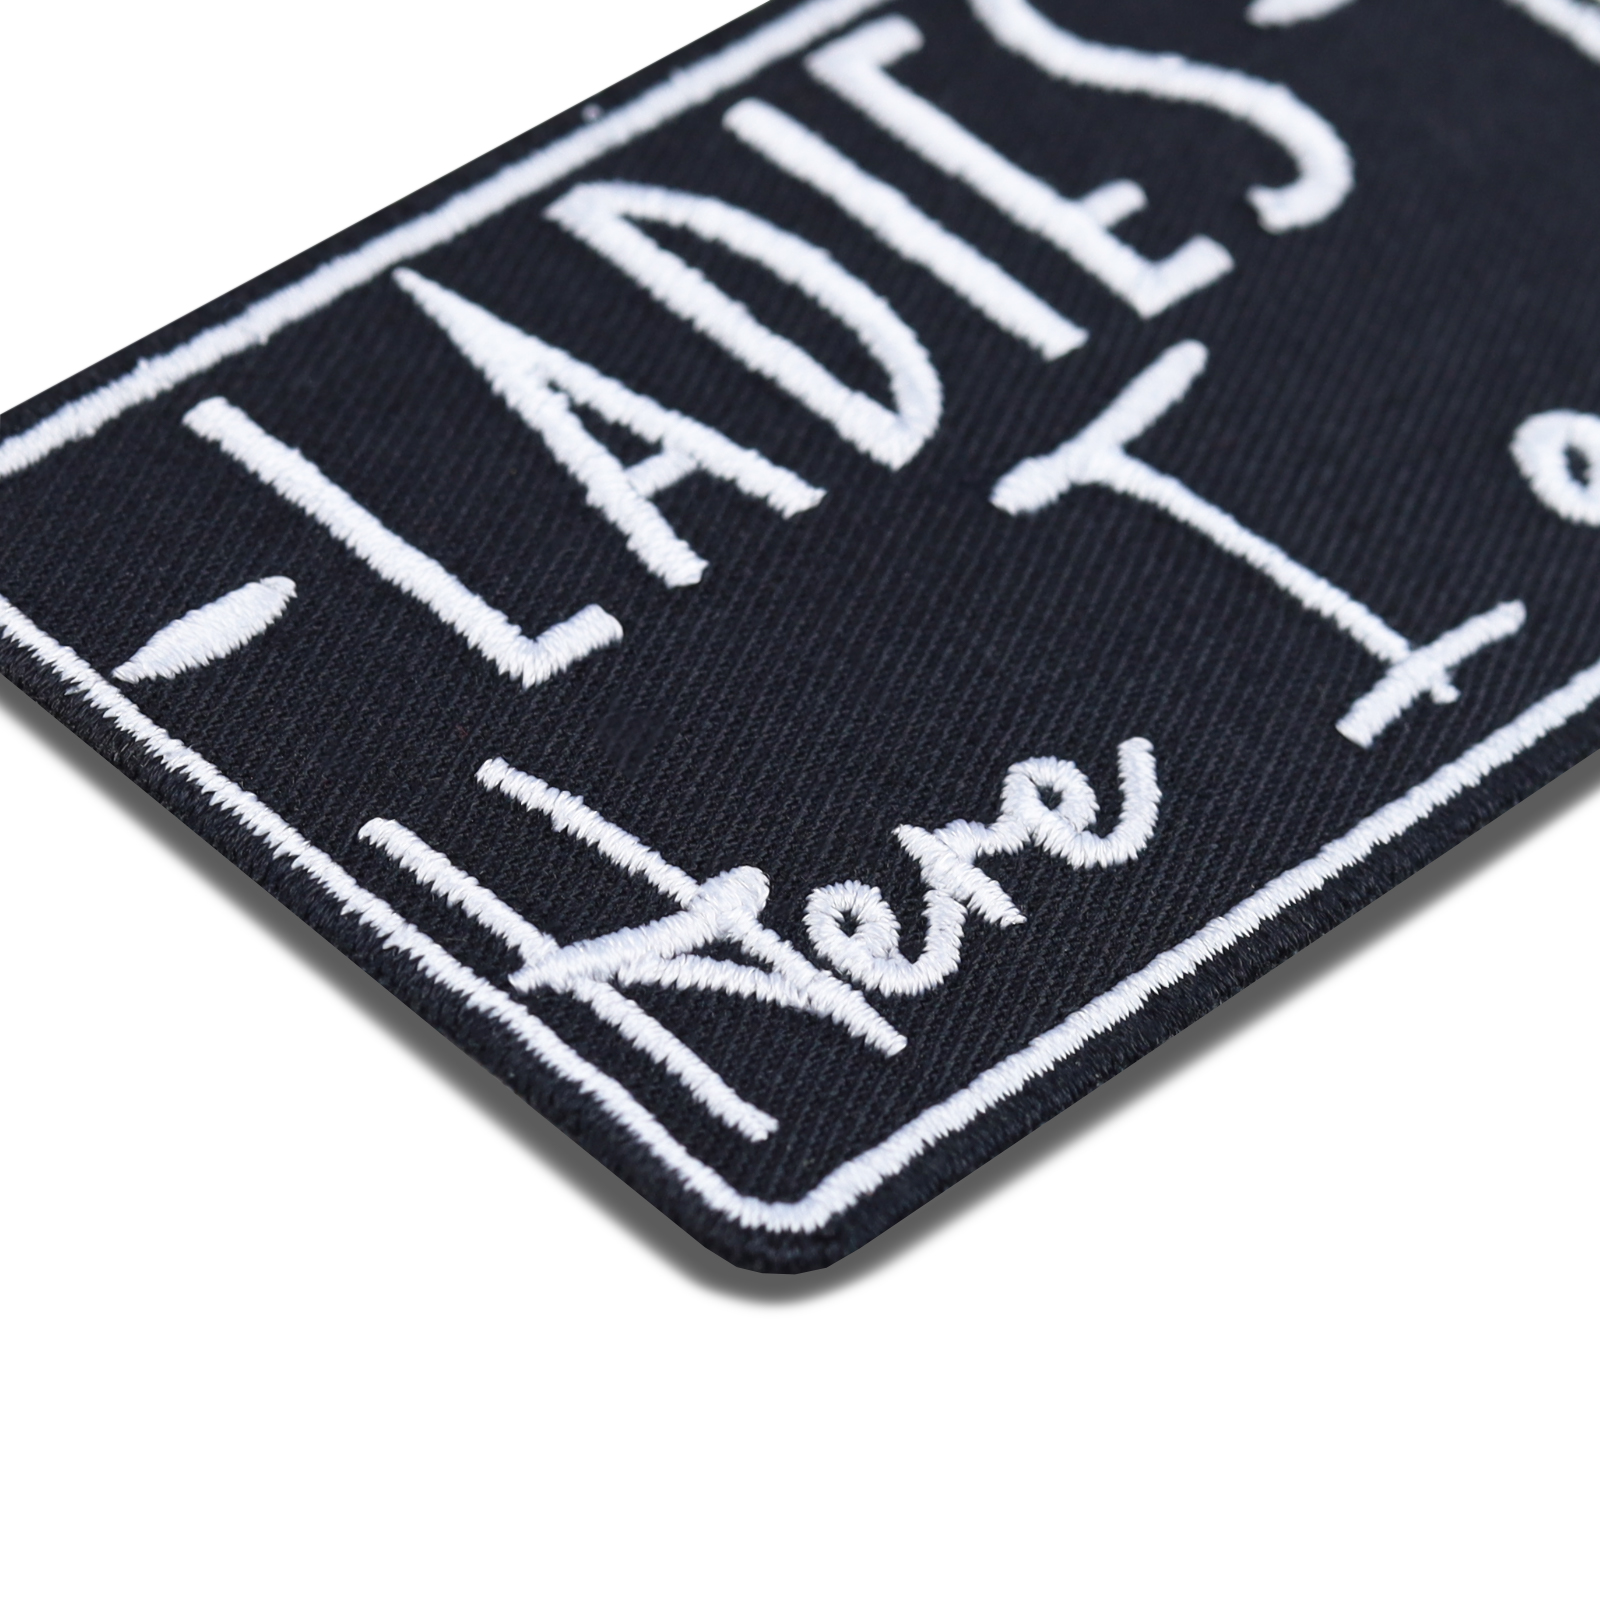 Ladies - here I am - Patch